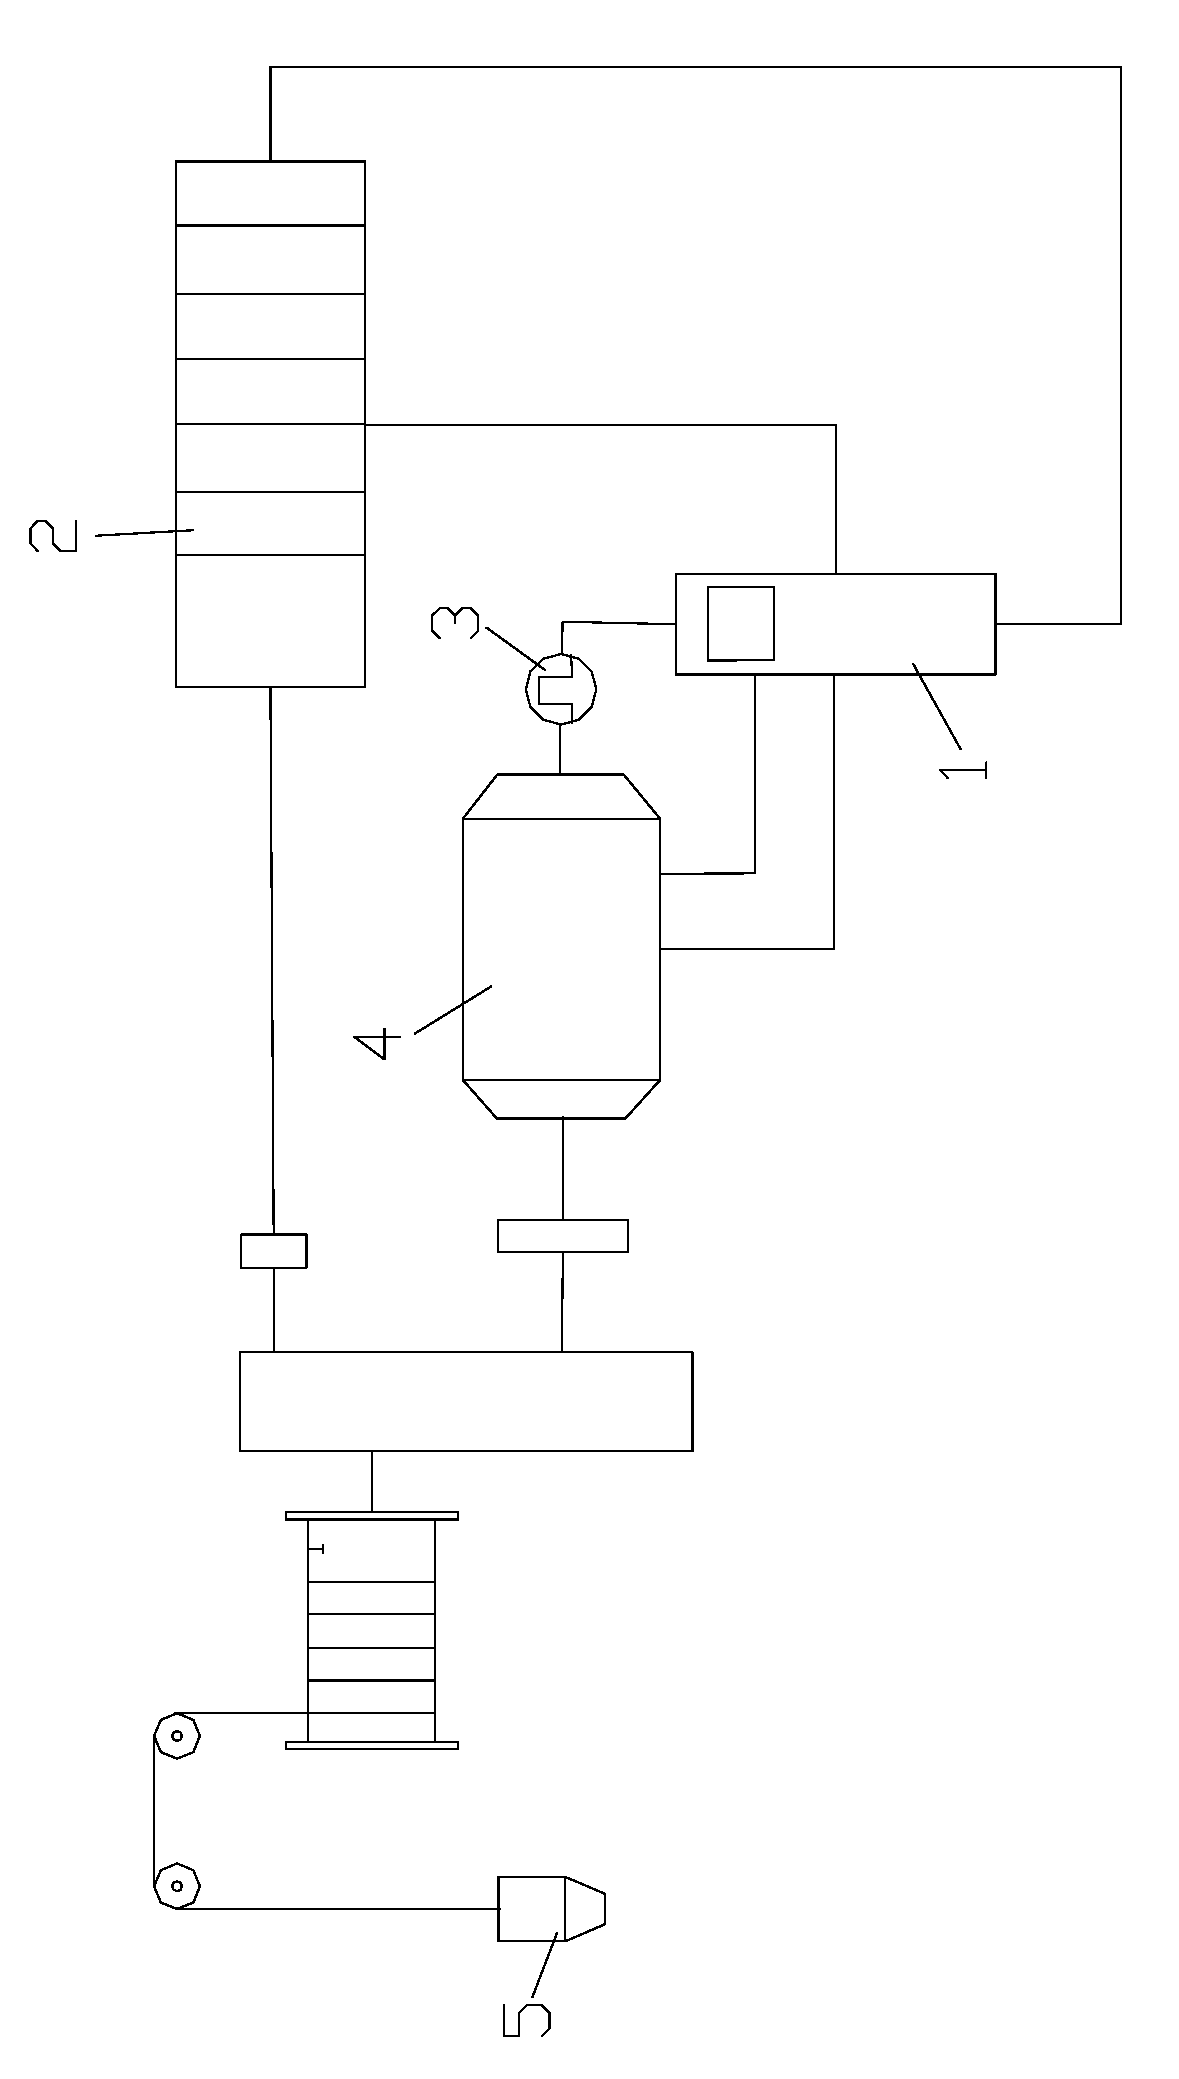 Control method of sounding rod to follow up charge level